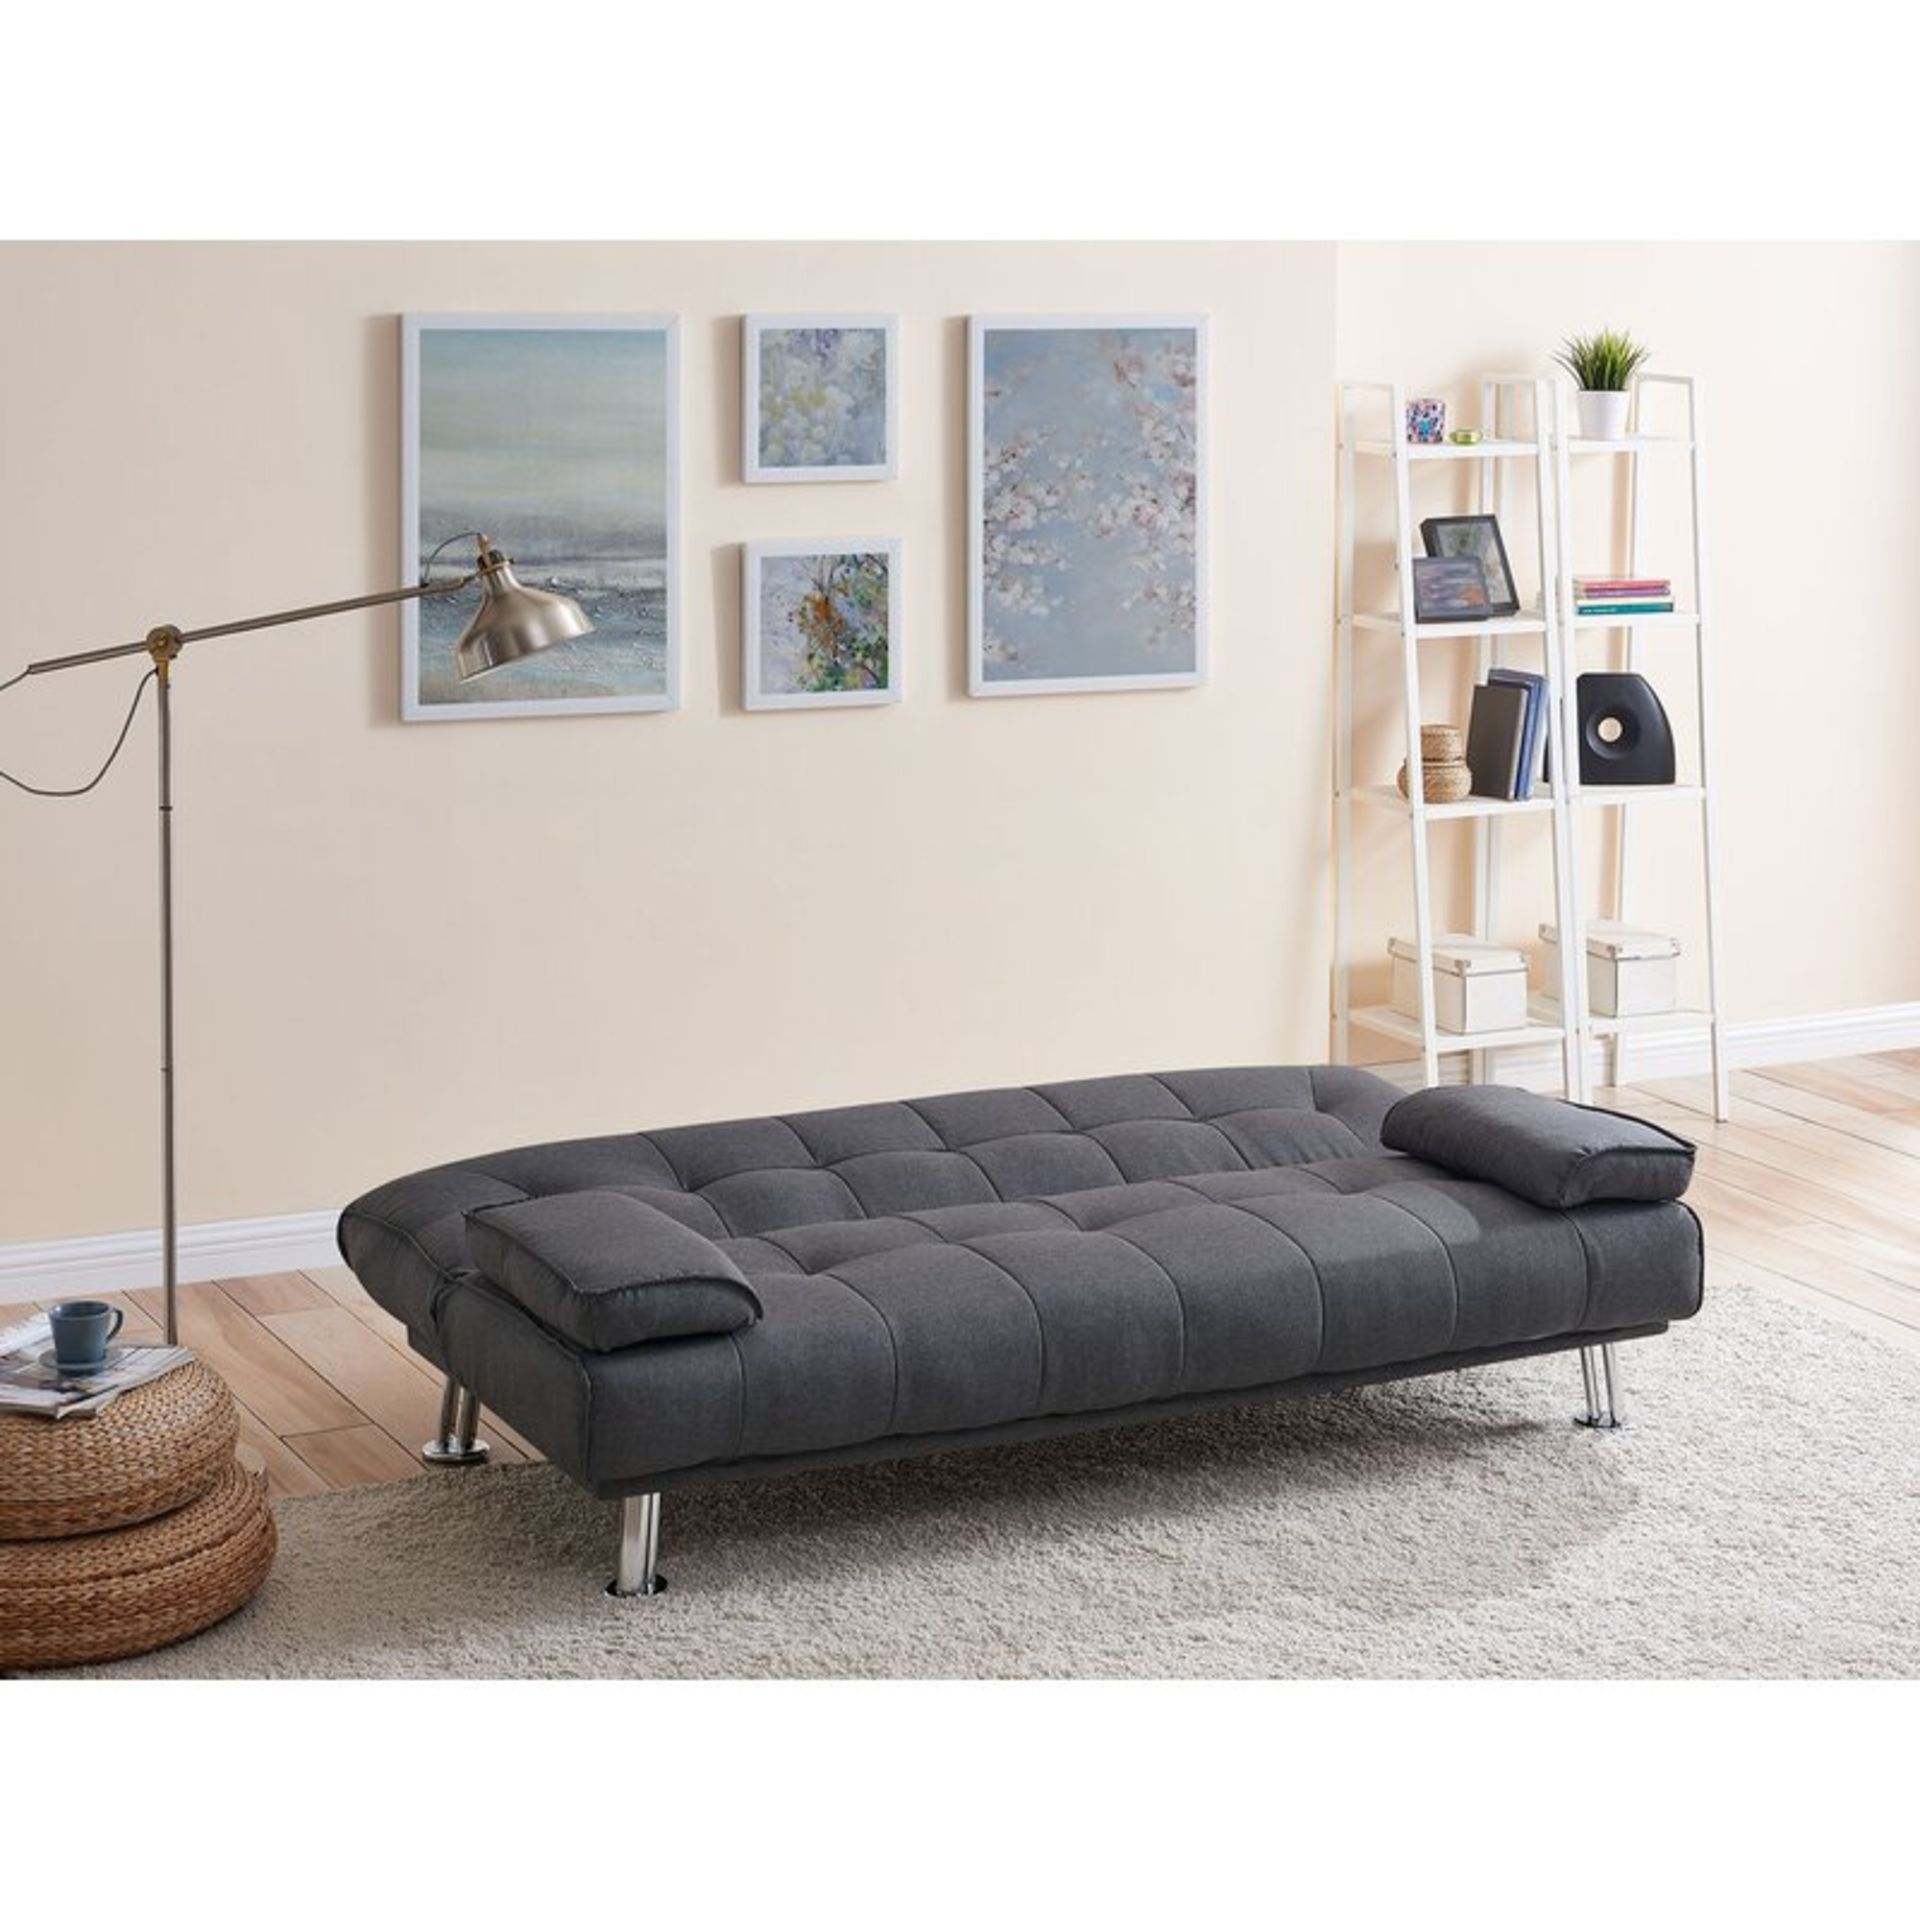 Rochford 2 Seater Clic Clac Sofa Bed - RRP £349.99. COLLECTION ONLY